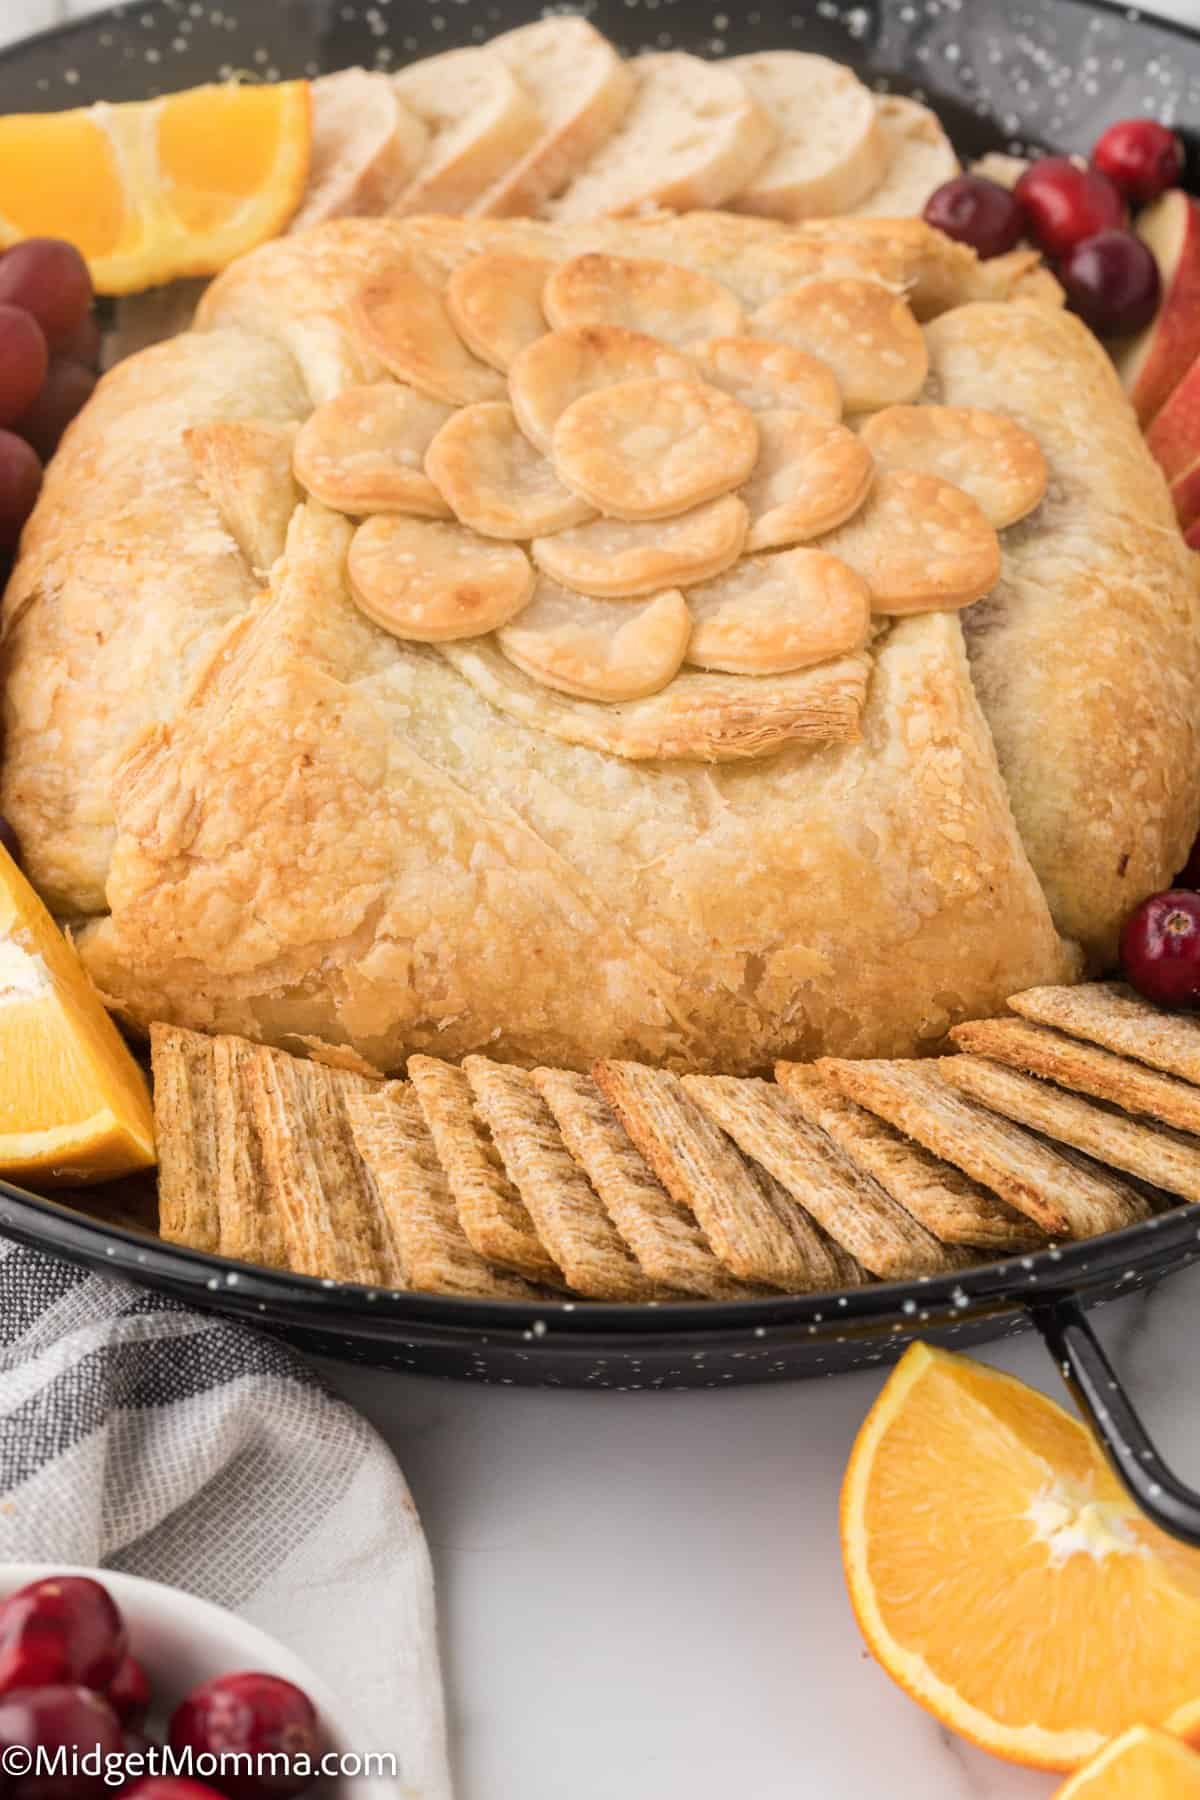 Cranberry Baked Brie